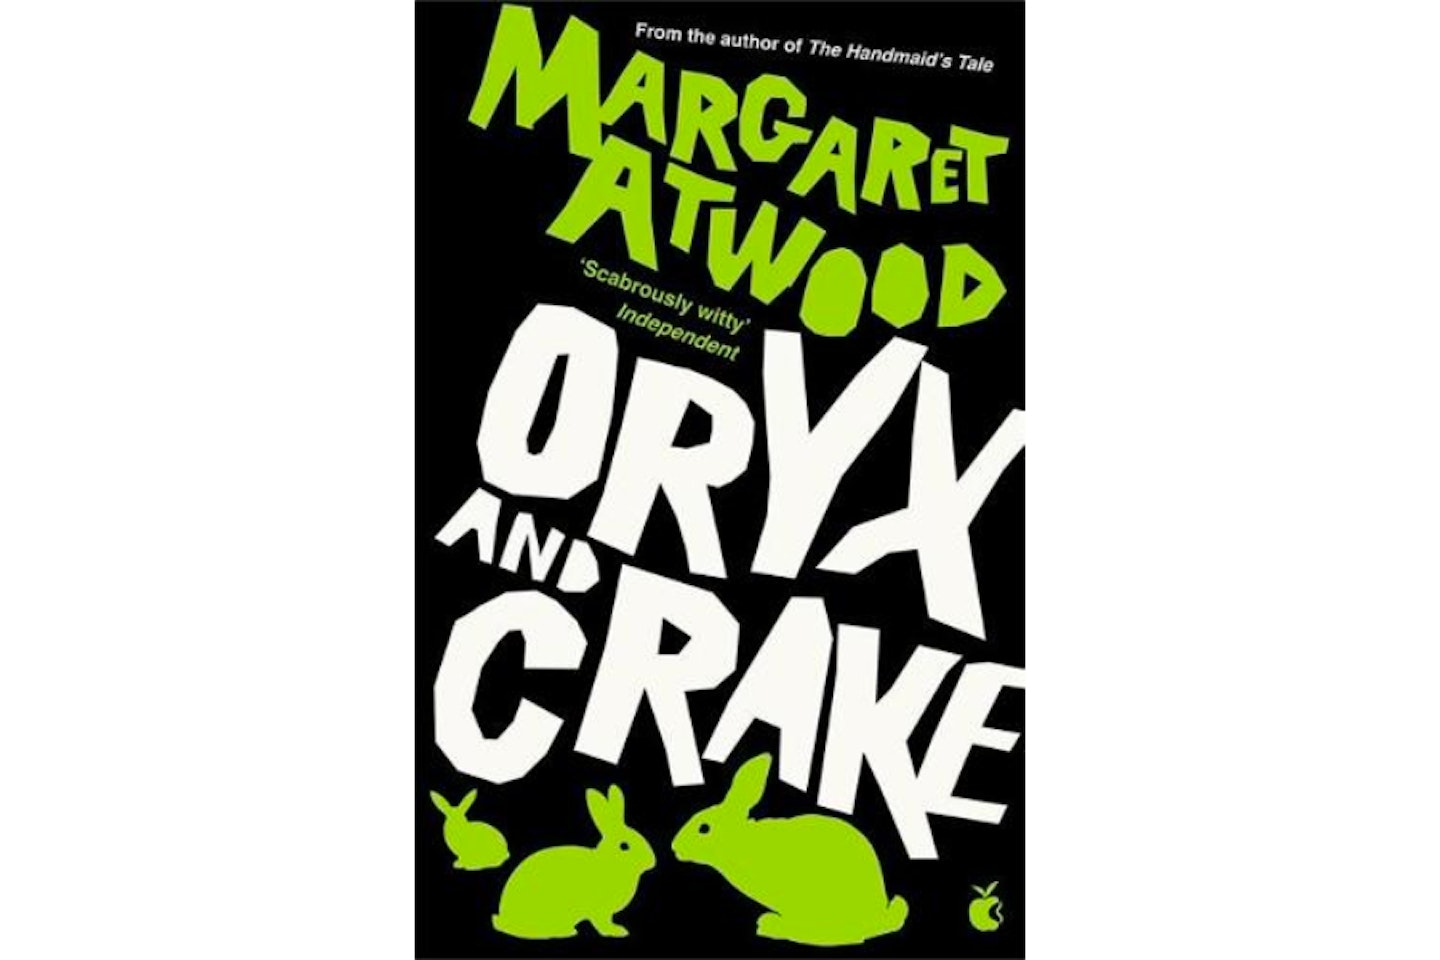 Oryx and Crake by Margaret Atwood, 2003